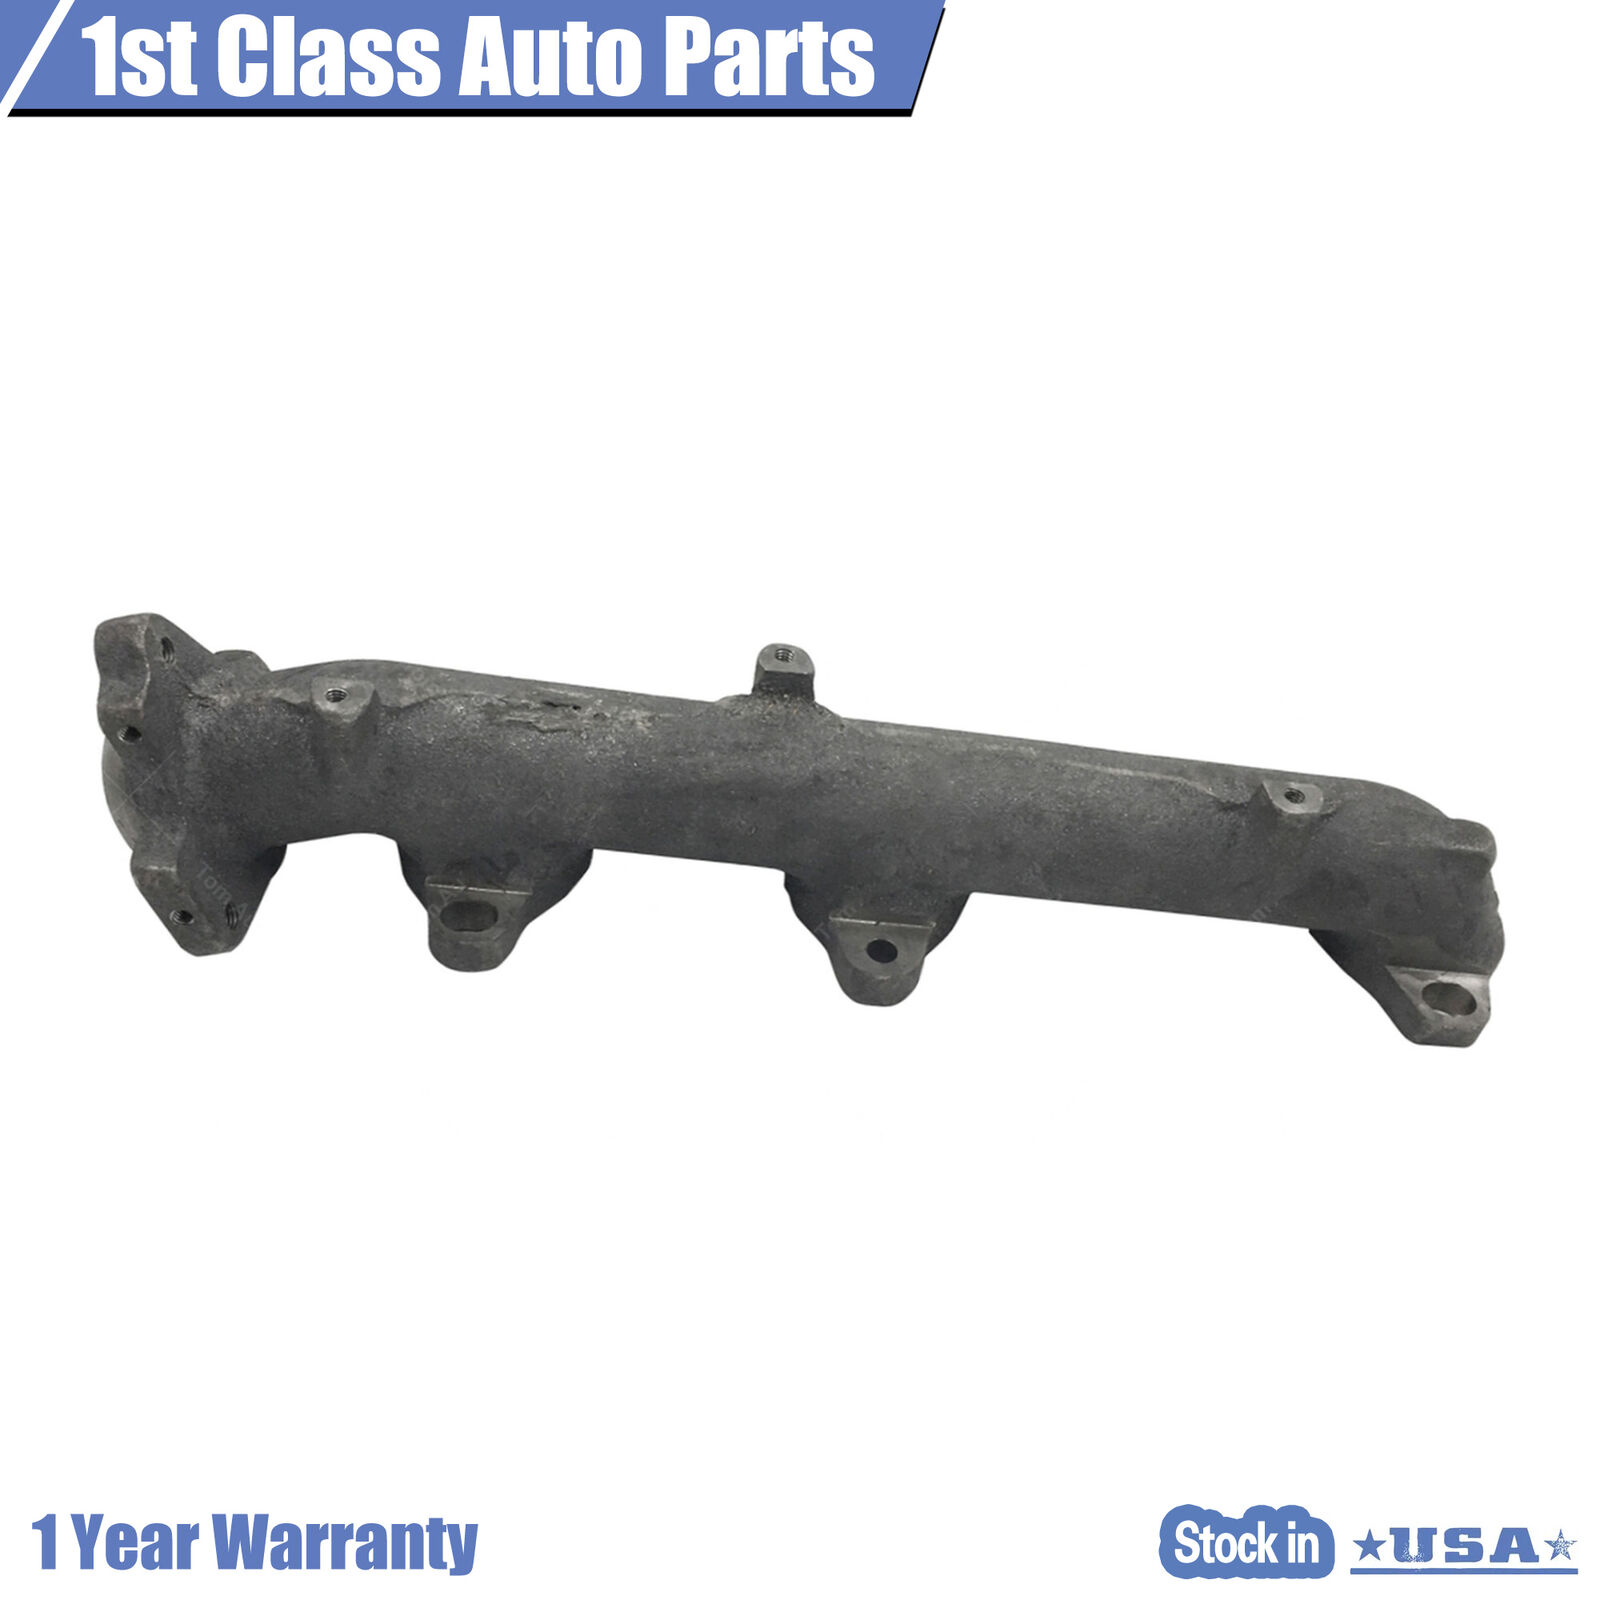 Exhaust Manifold Front Left For 1993-2004 Buick Regal Chevrolet Lumina 674-544